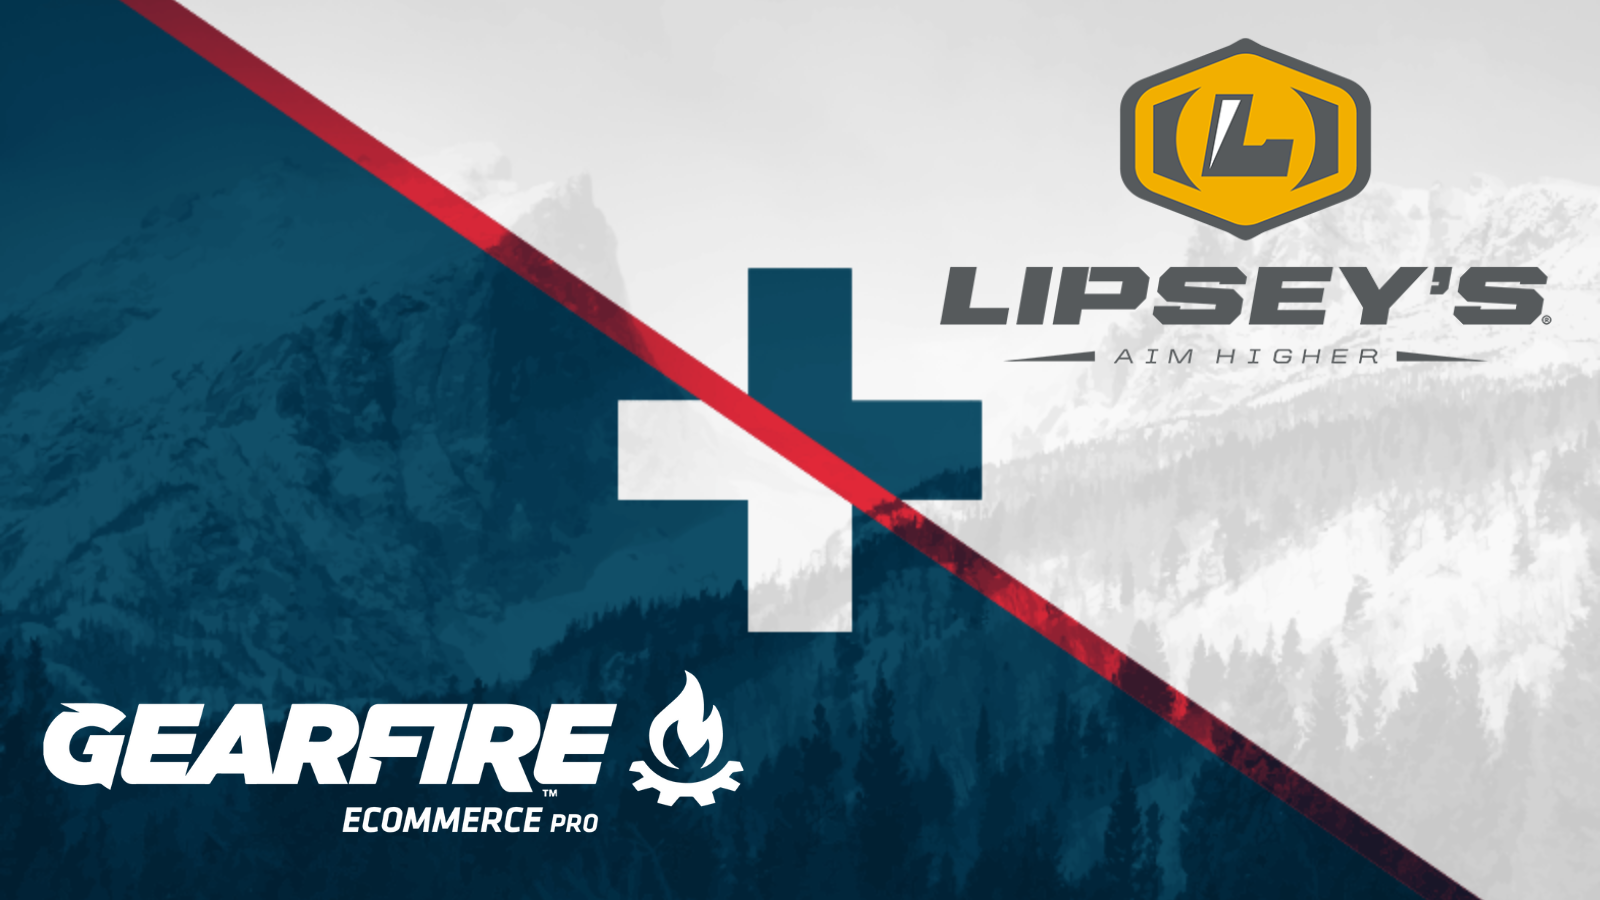 Gearfire eCommerce Pro Completes Integration with Lipsey’s Wholesale, Offering Seamless Product Placement and Dropship Services to Firearms Retailers featured img